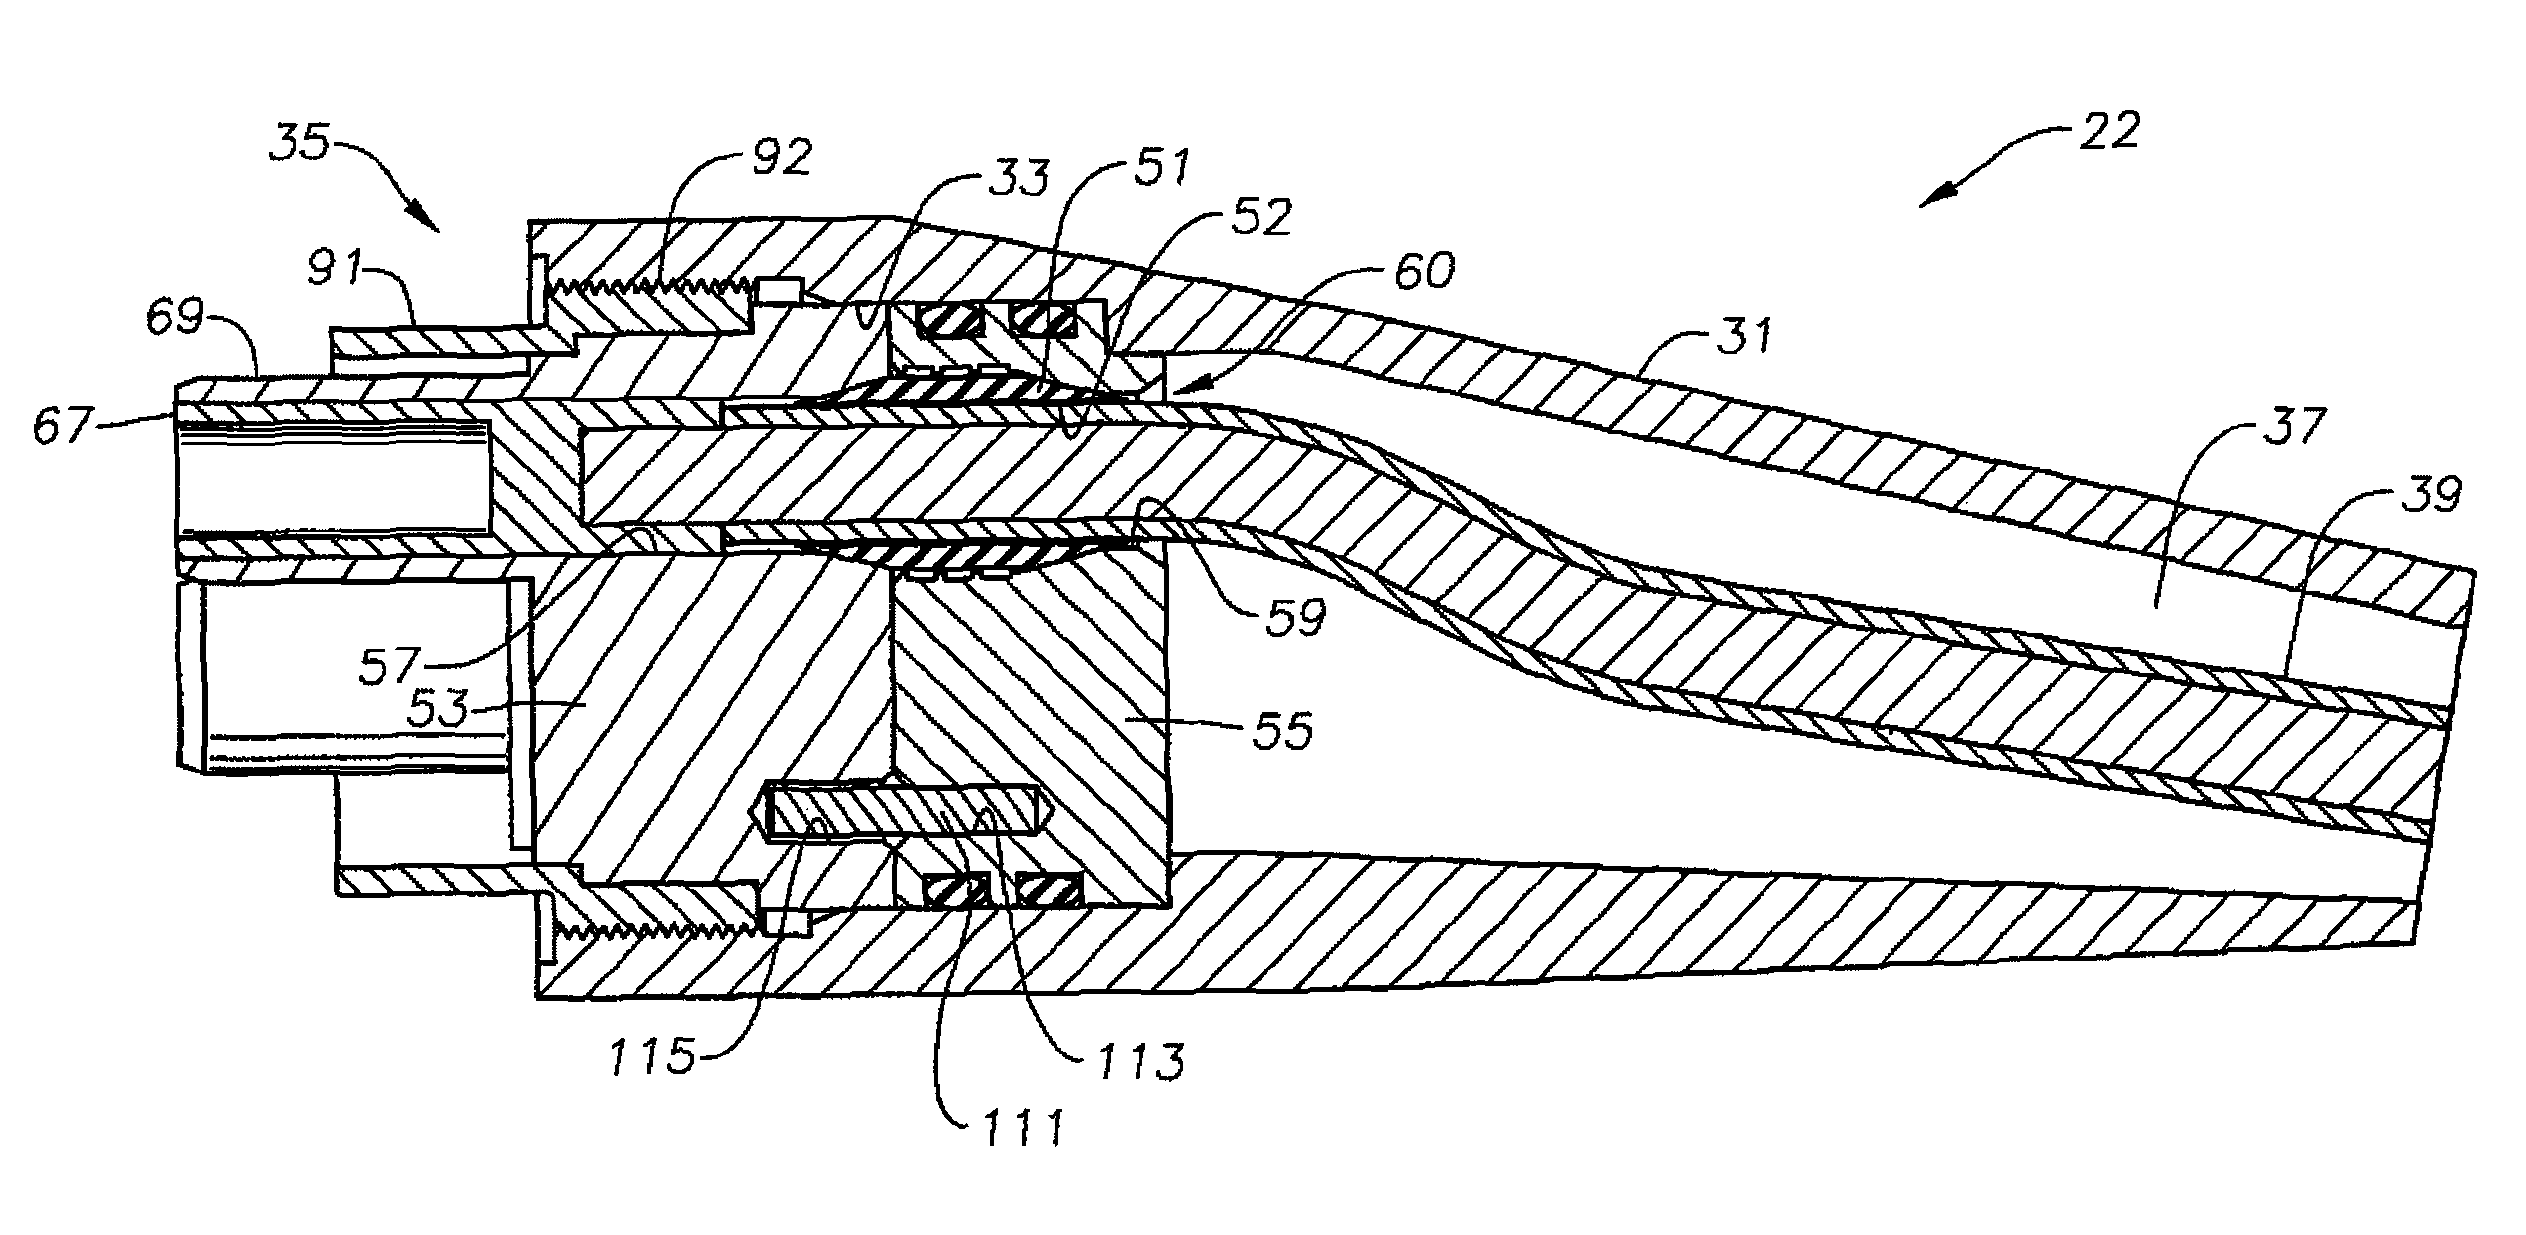 Apparatus and methods of sealing and fastening pothead to power cable